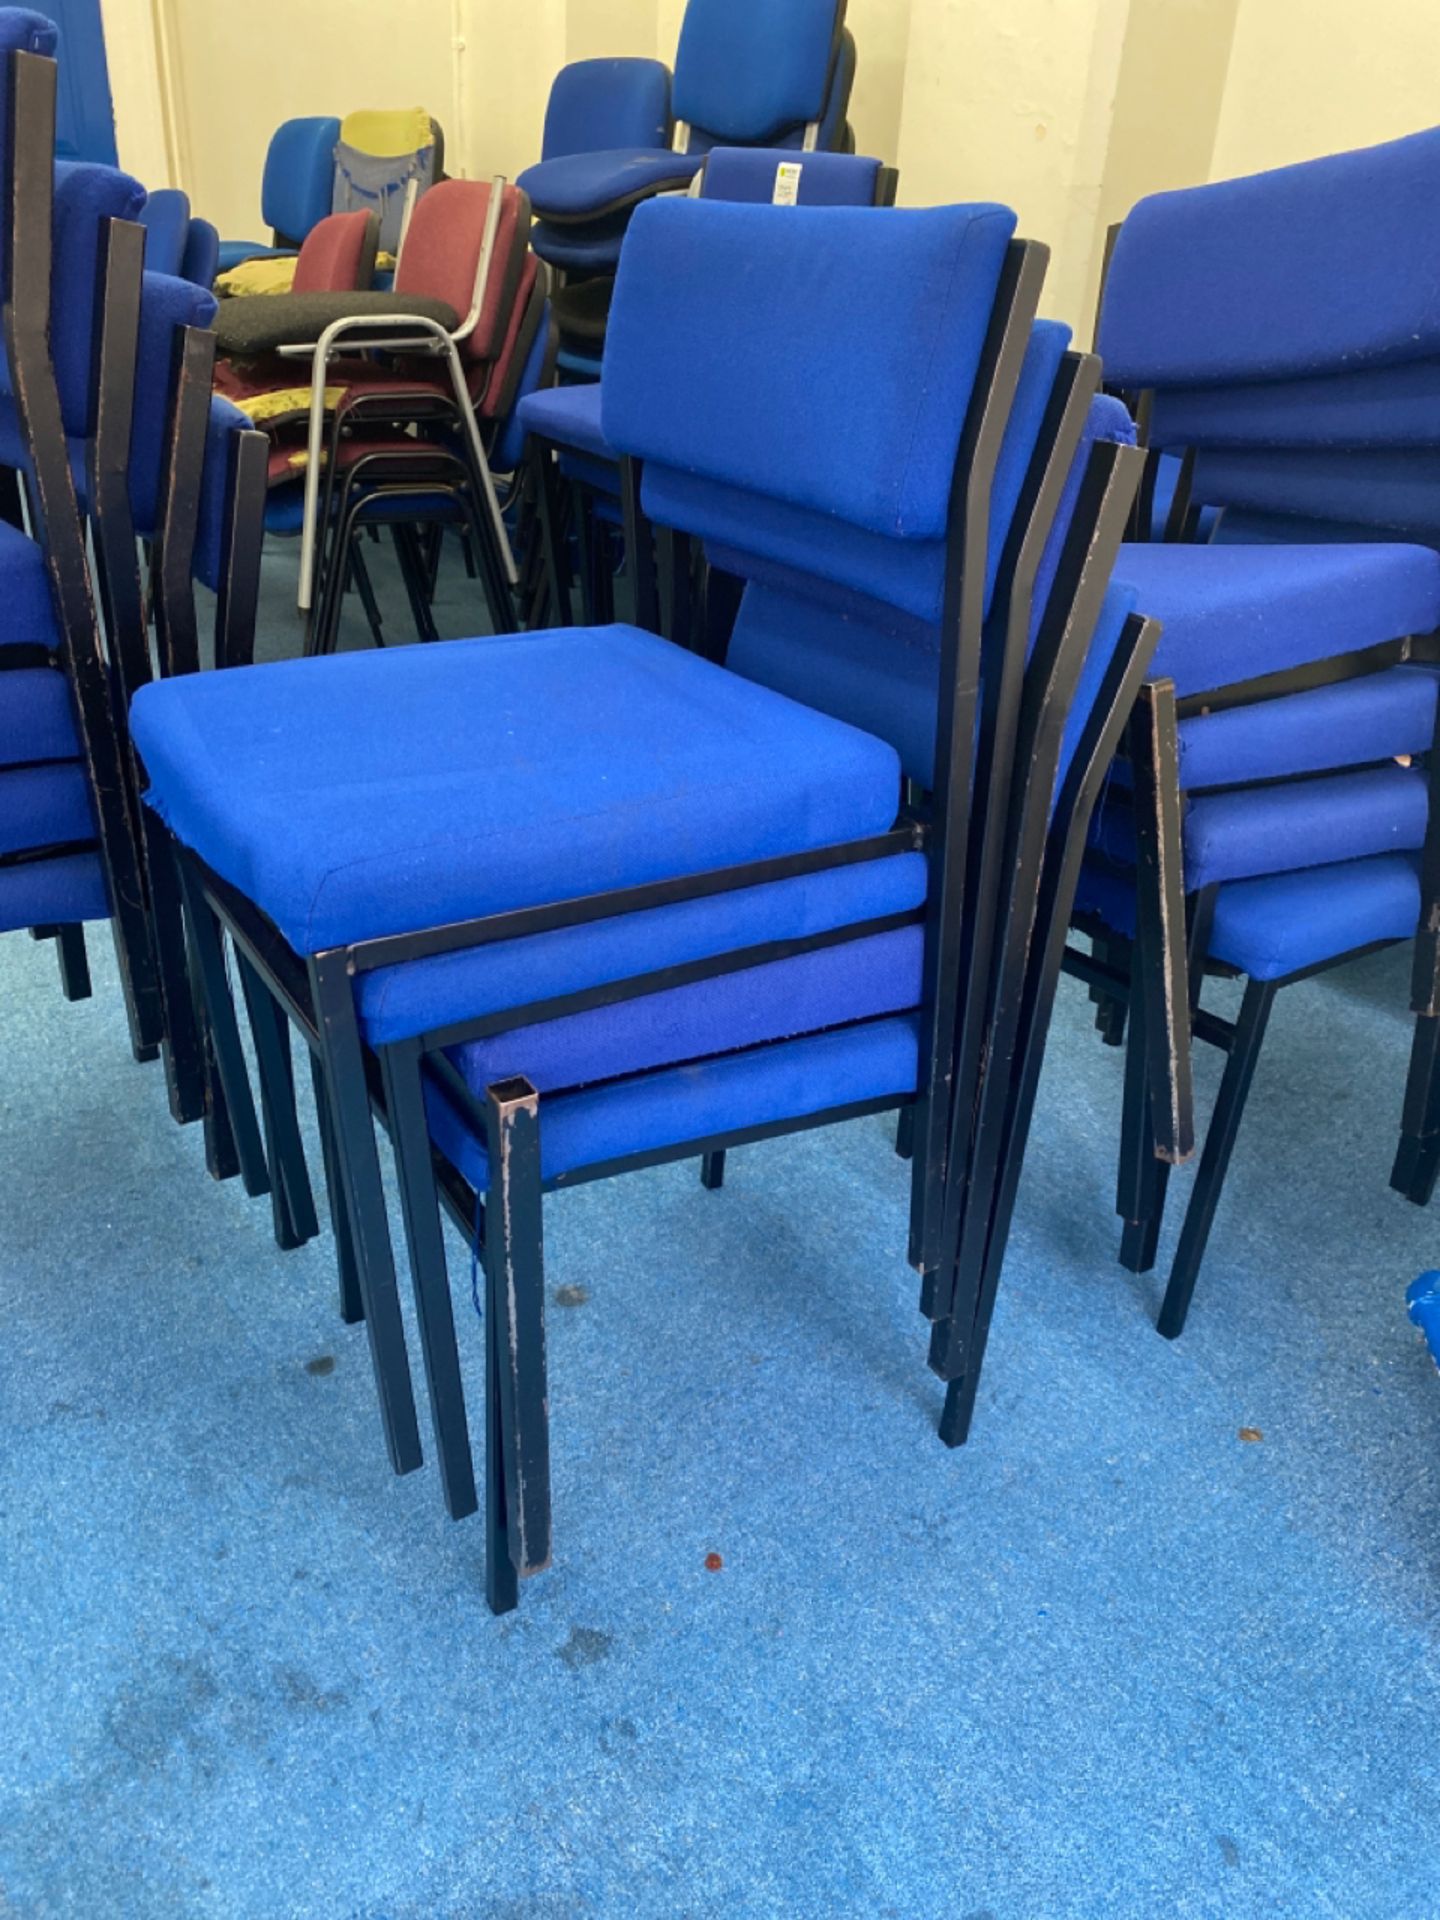 Set of 4 Cusioned Classroom Chairs - Image 12 of 14